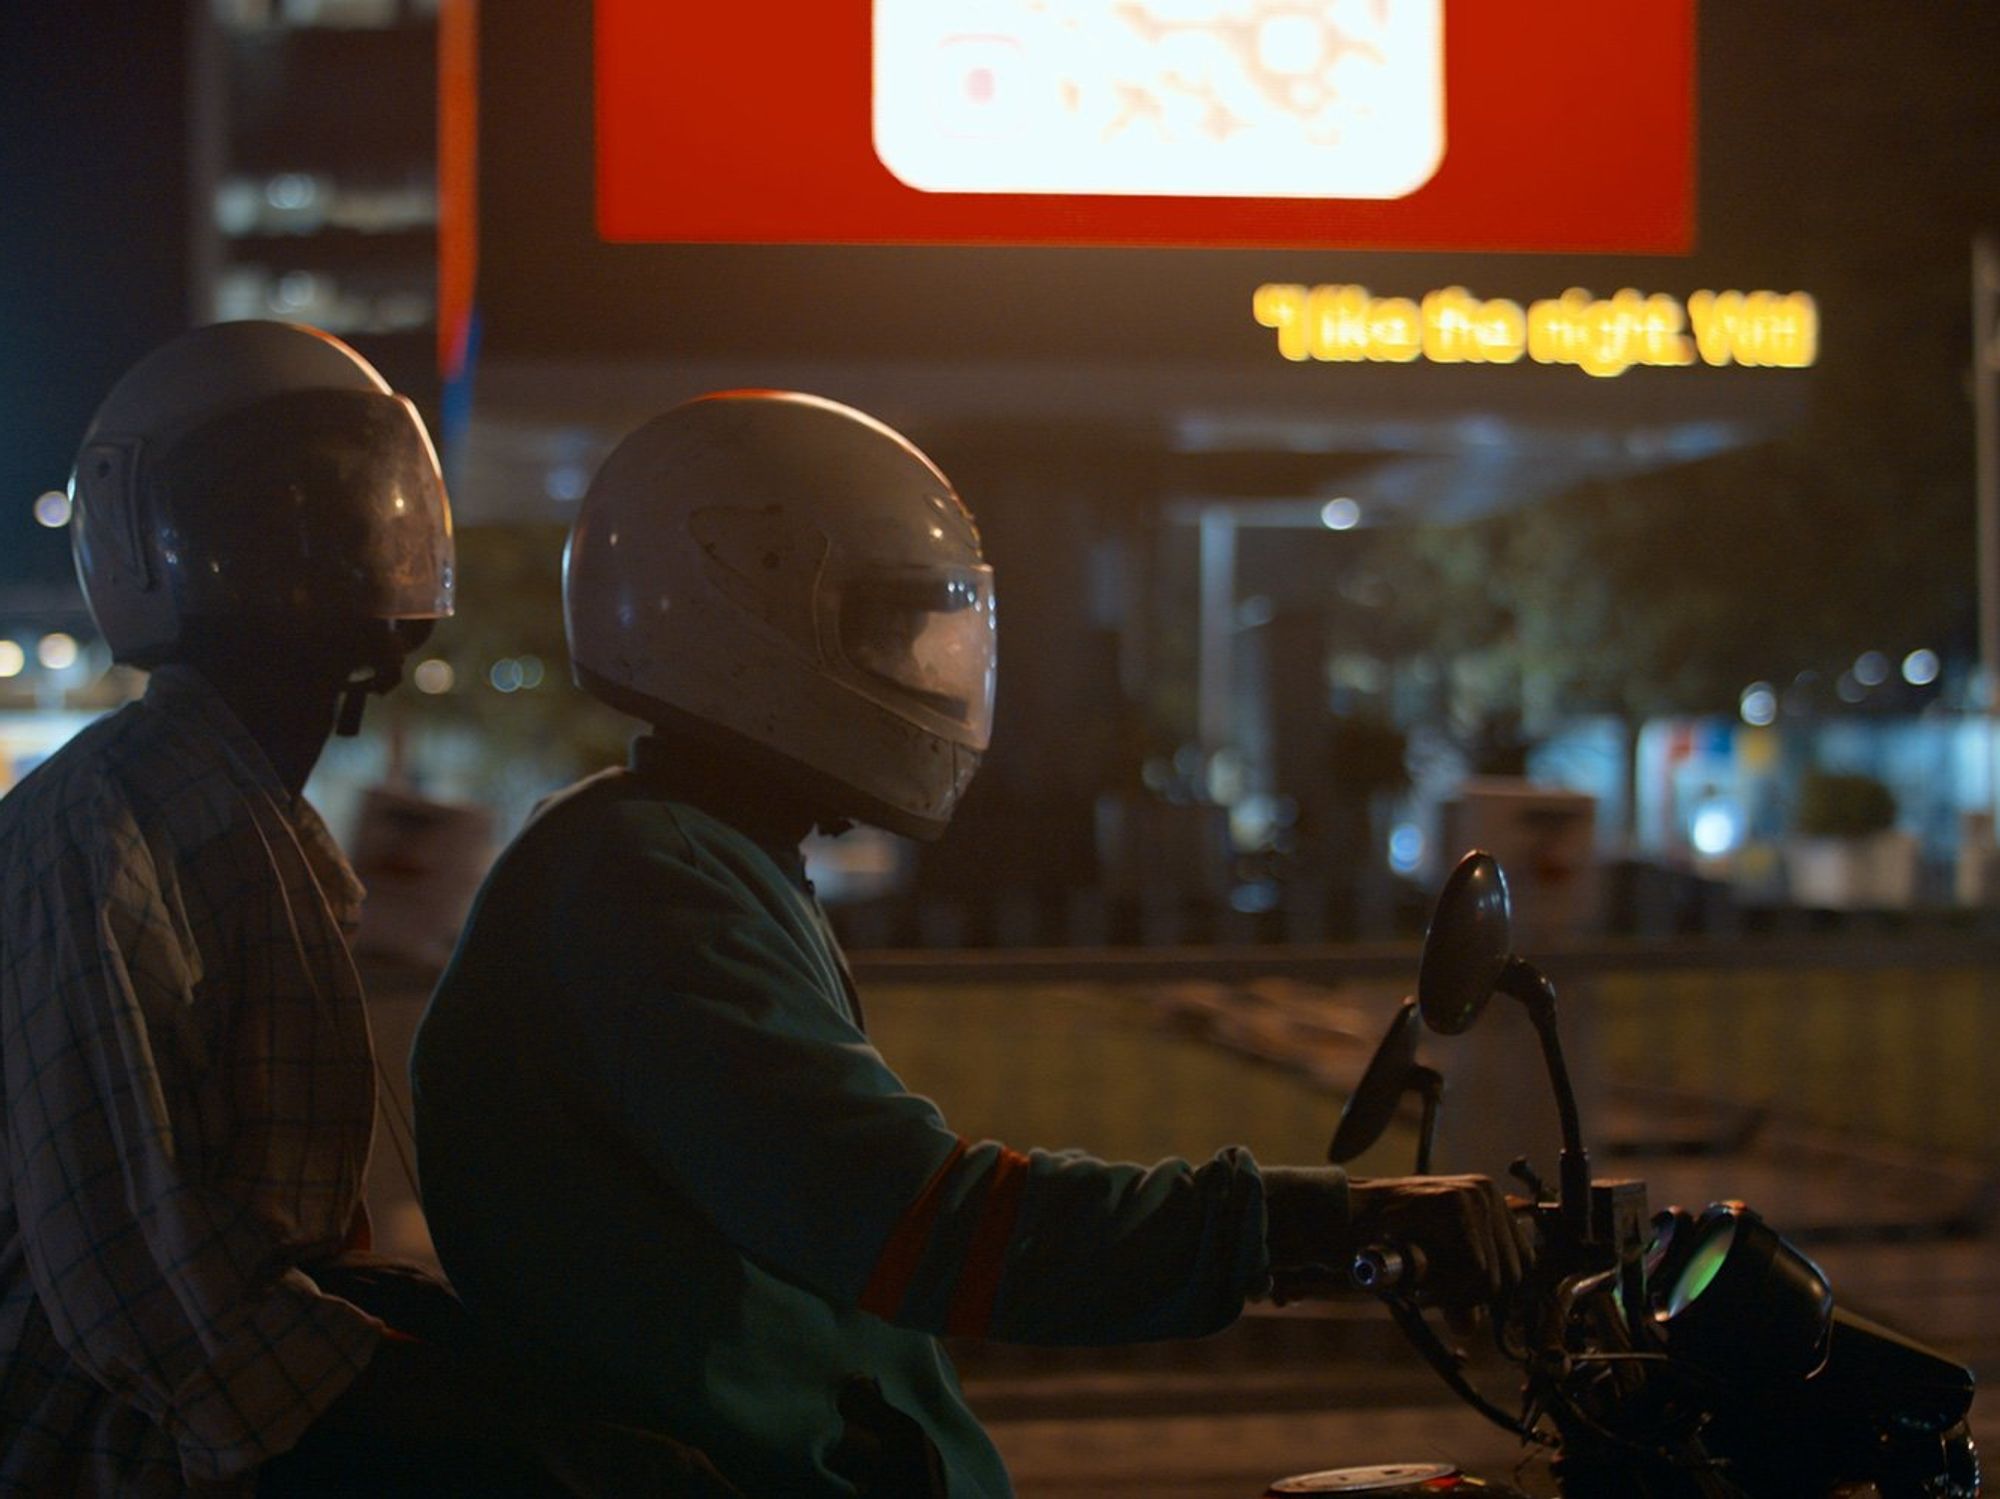 A still from the film of two men on a motorcycle wearing helmets